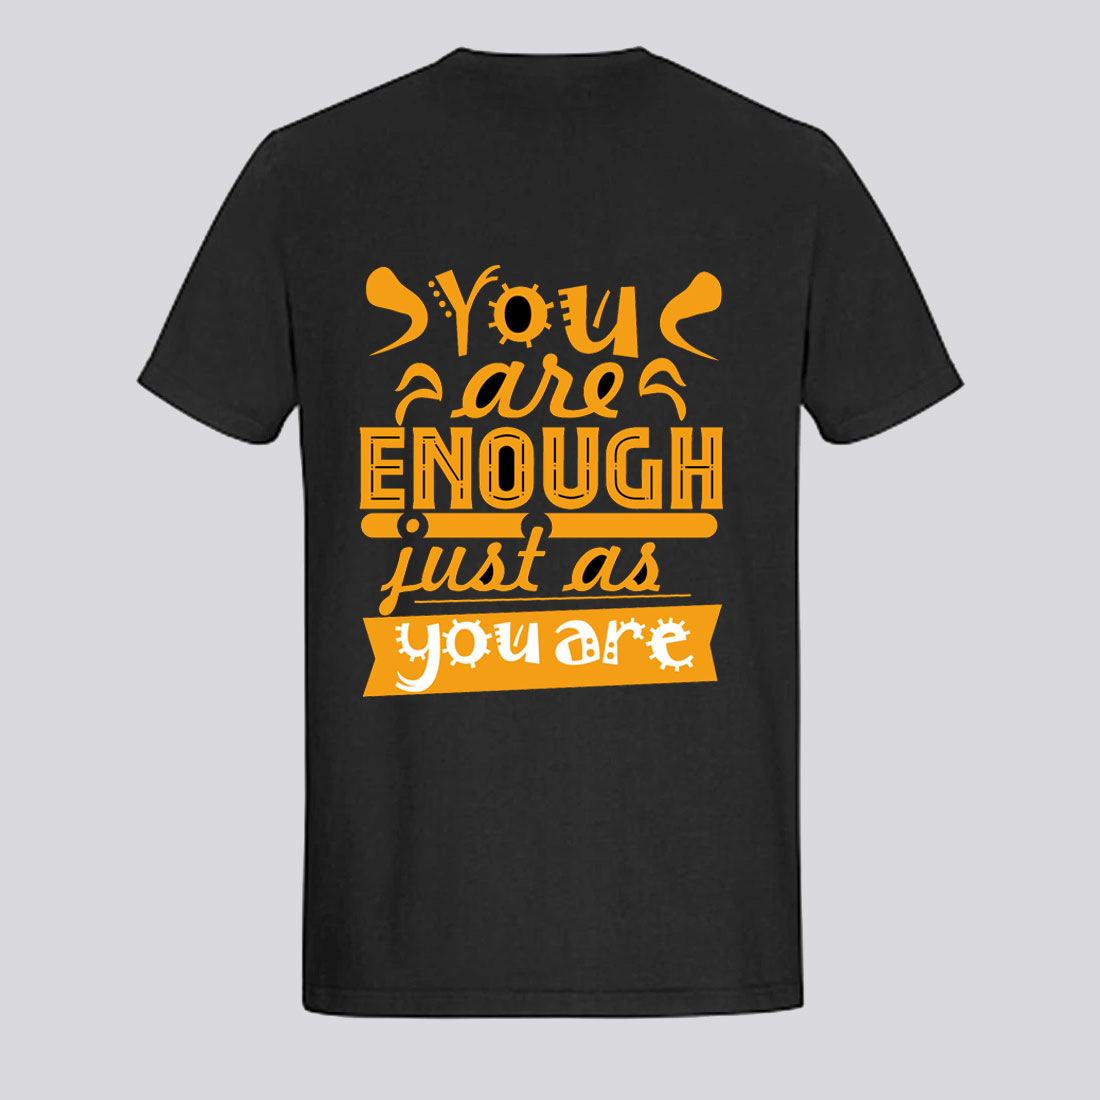 T-shirt Design with some Motivational Quotes preview image.